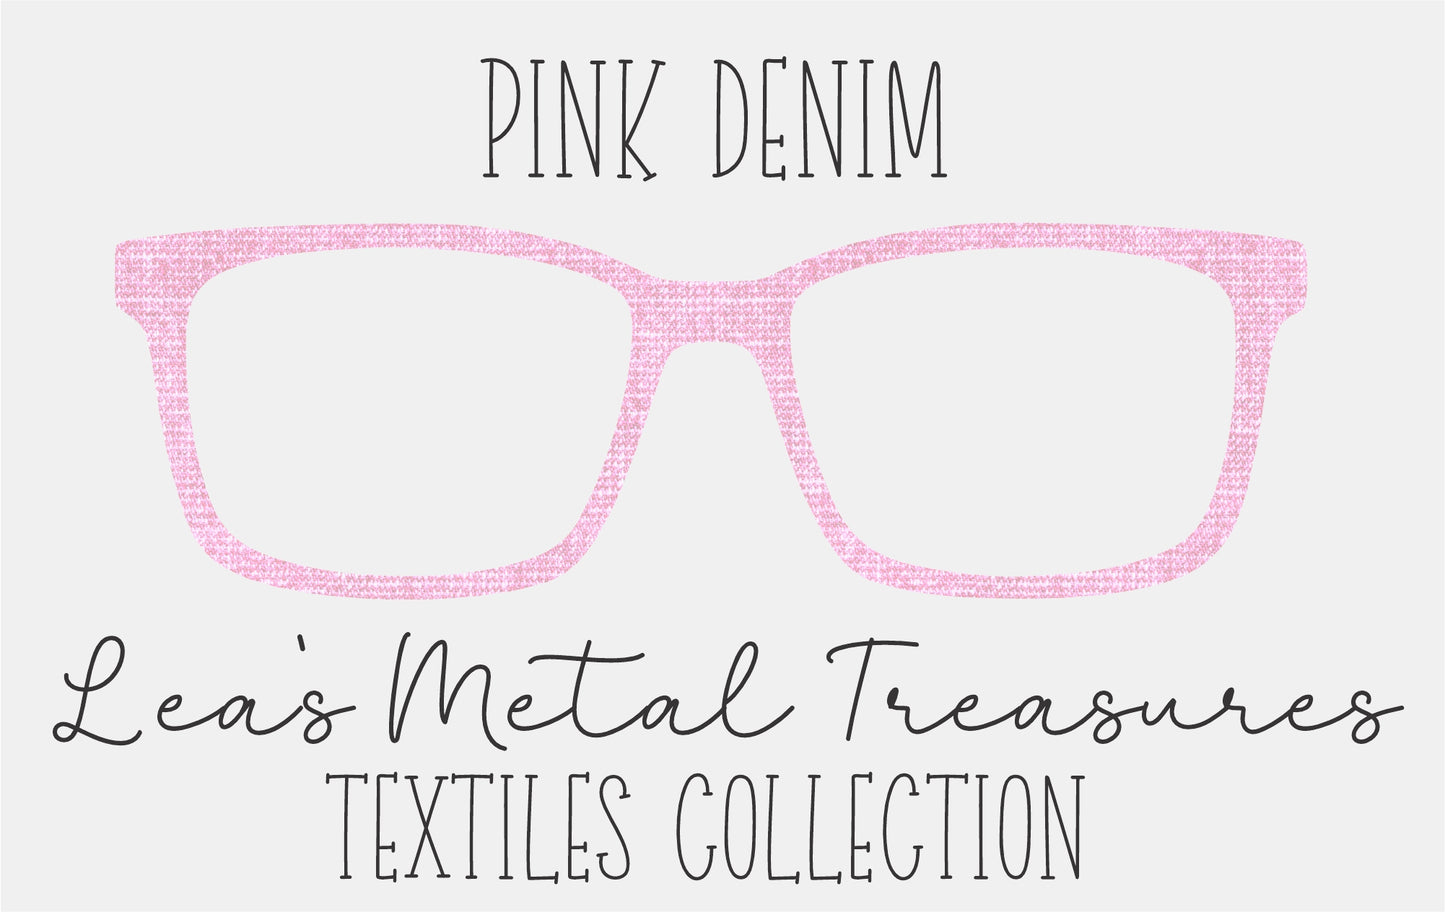 Pink Denim Eyewear Frame Toppers COMES WITH MAGNETS